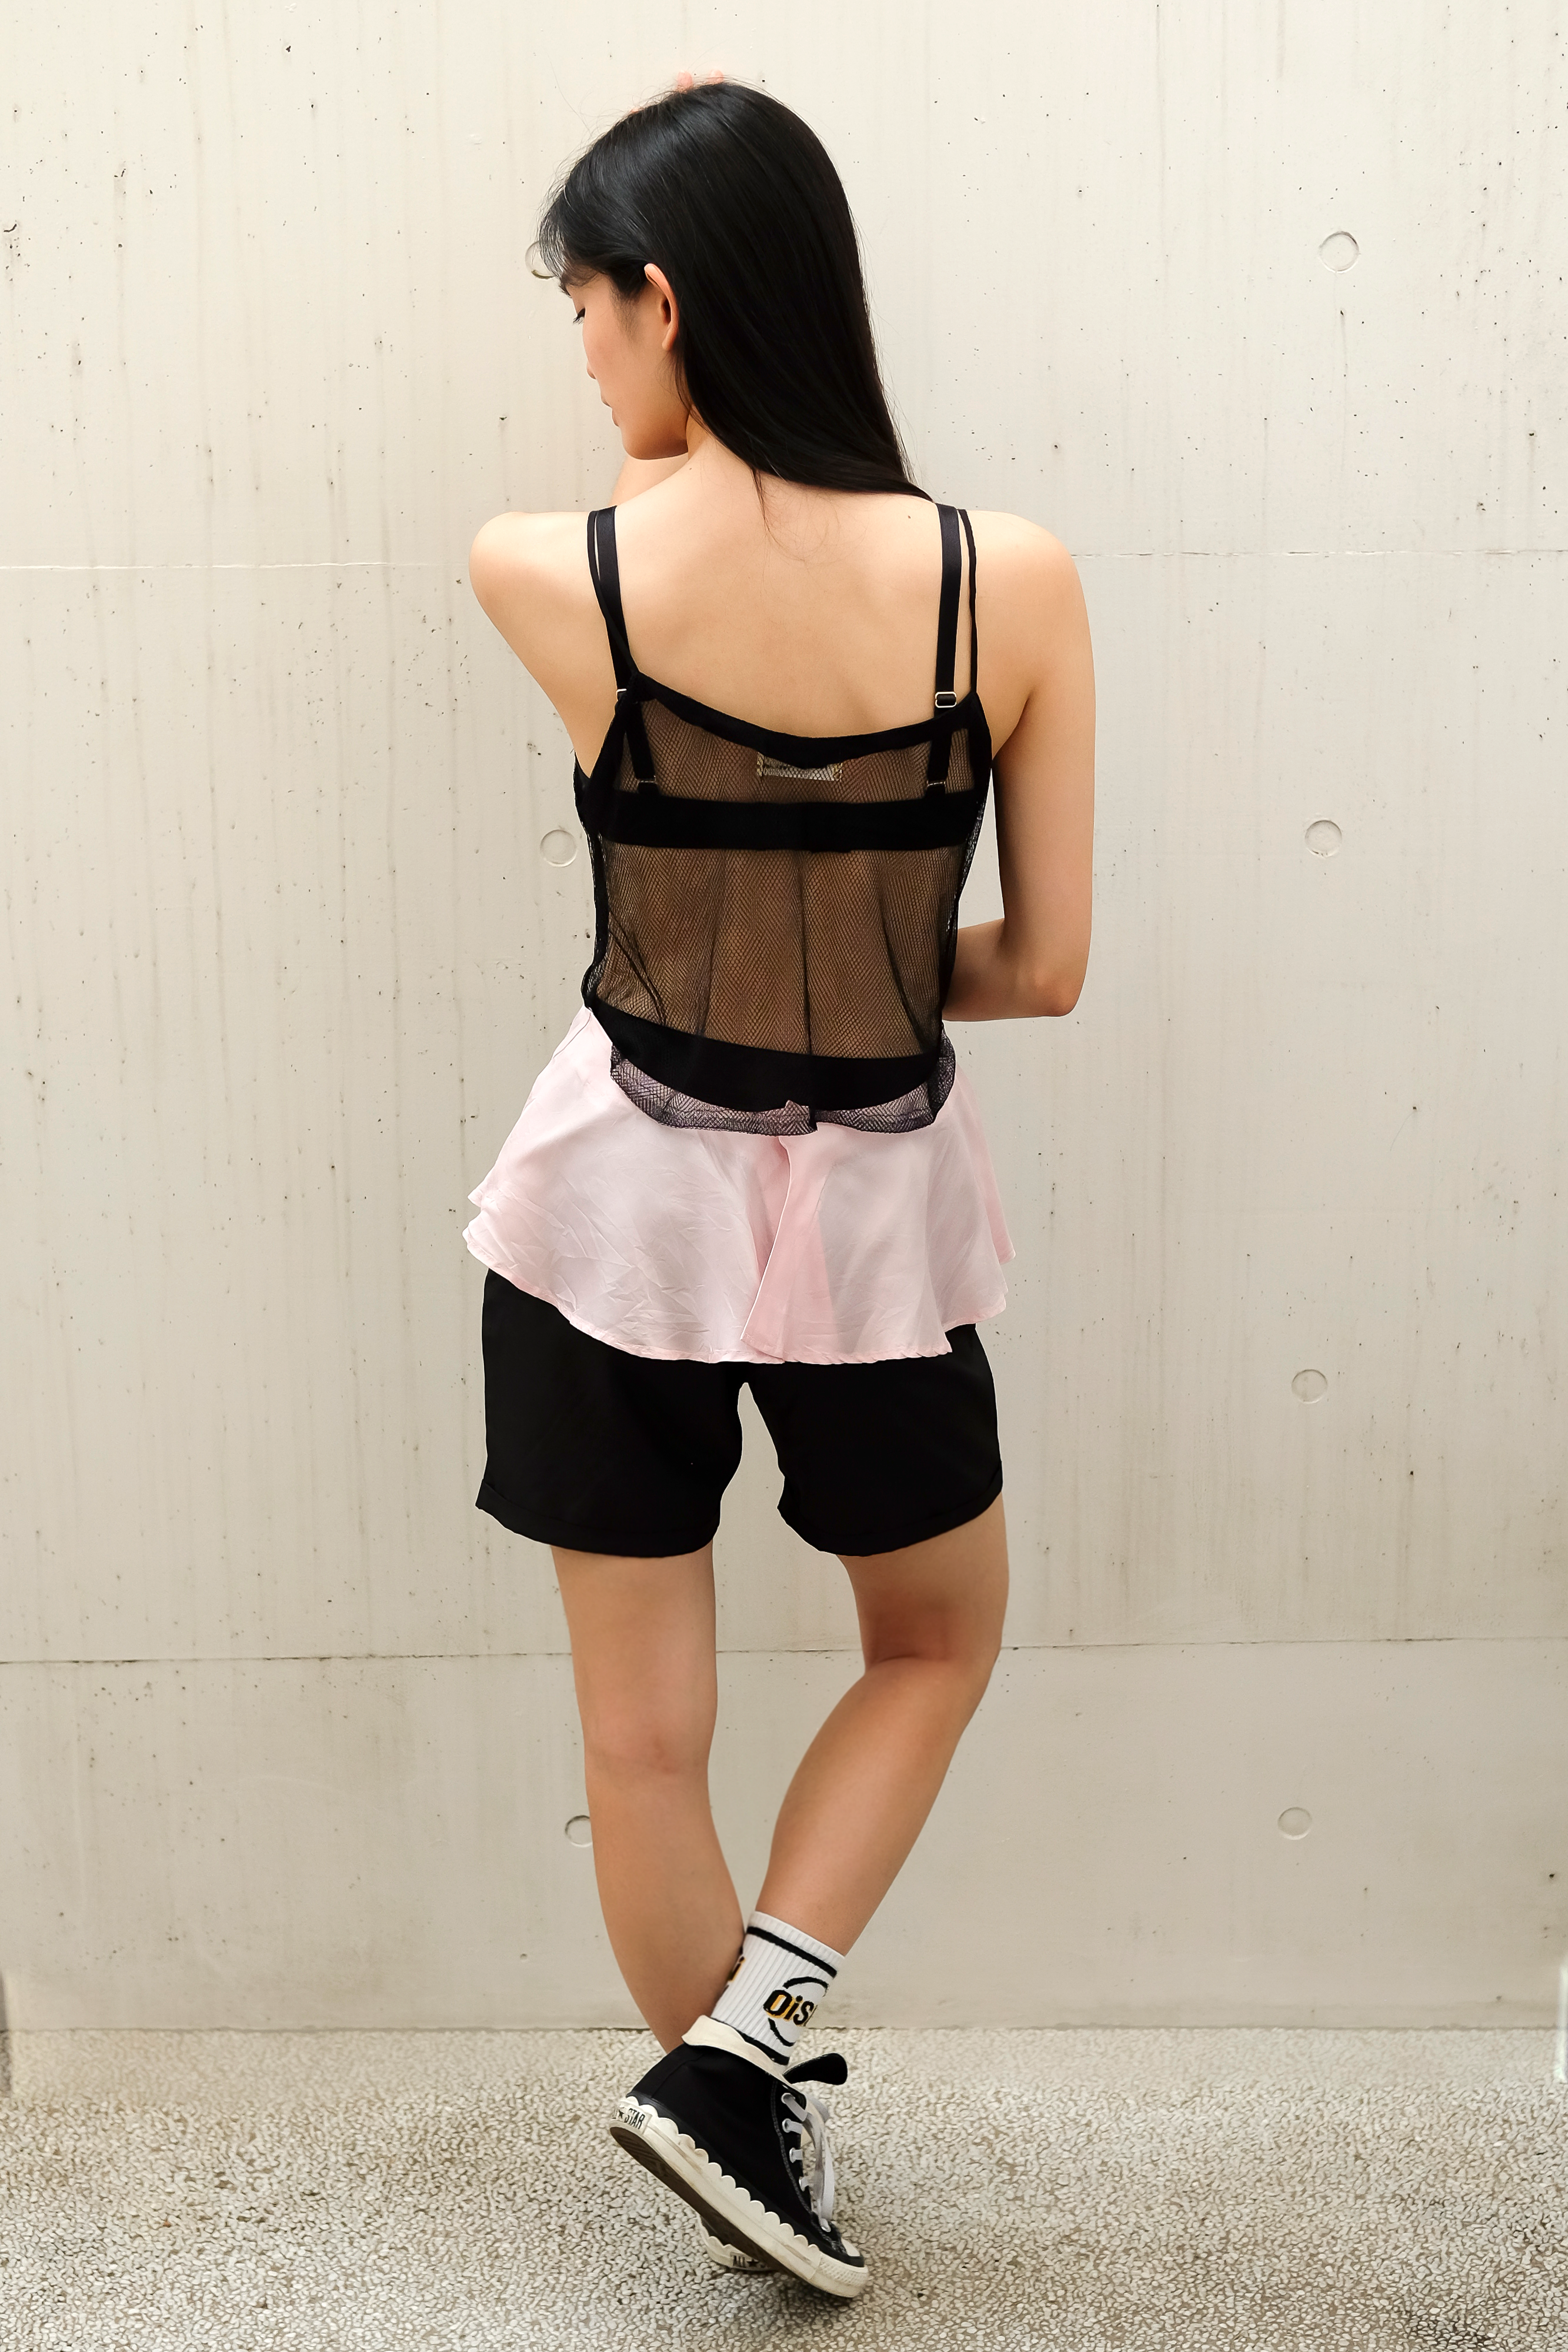 Toga Pulla Mesh Top black and pink rear view